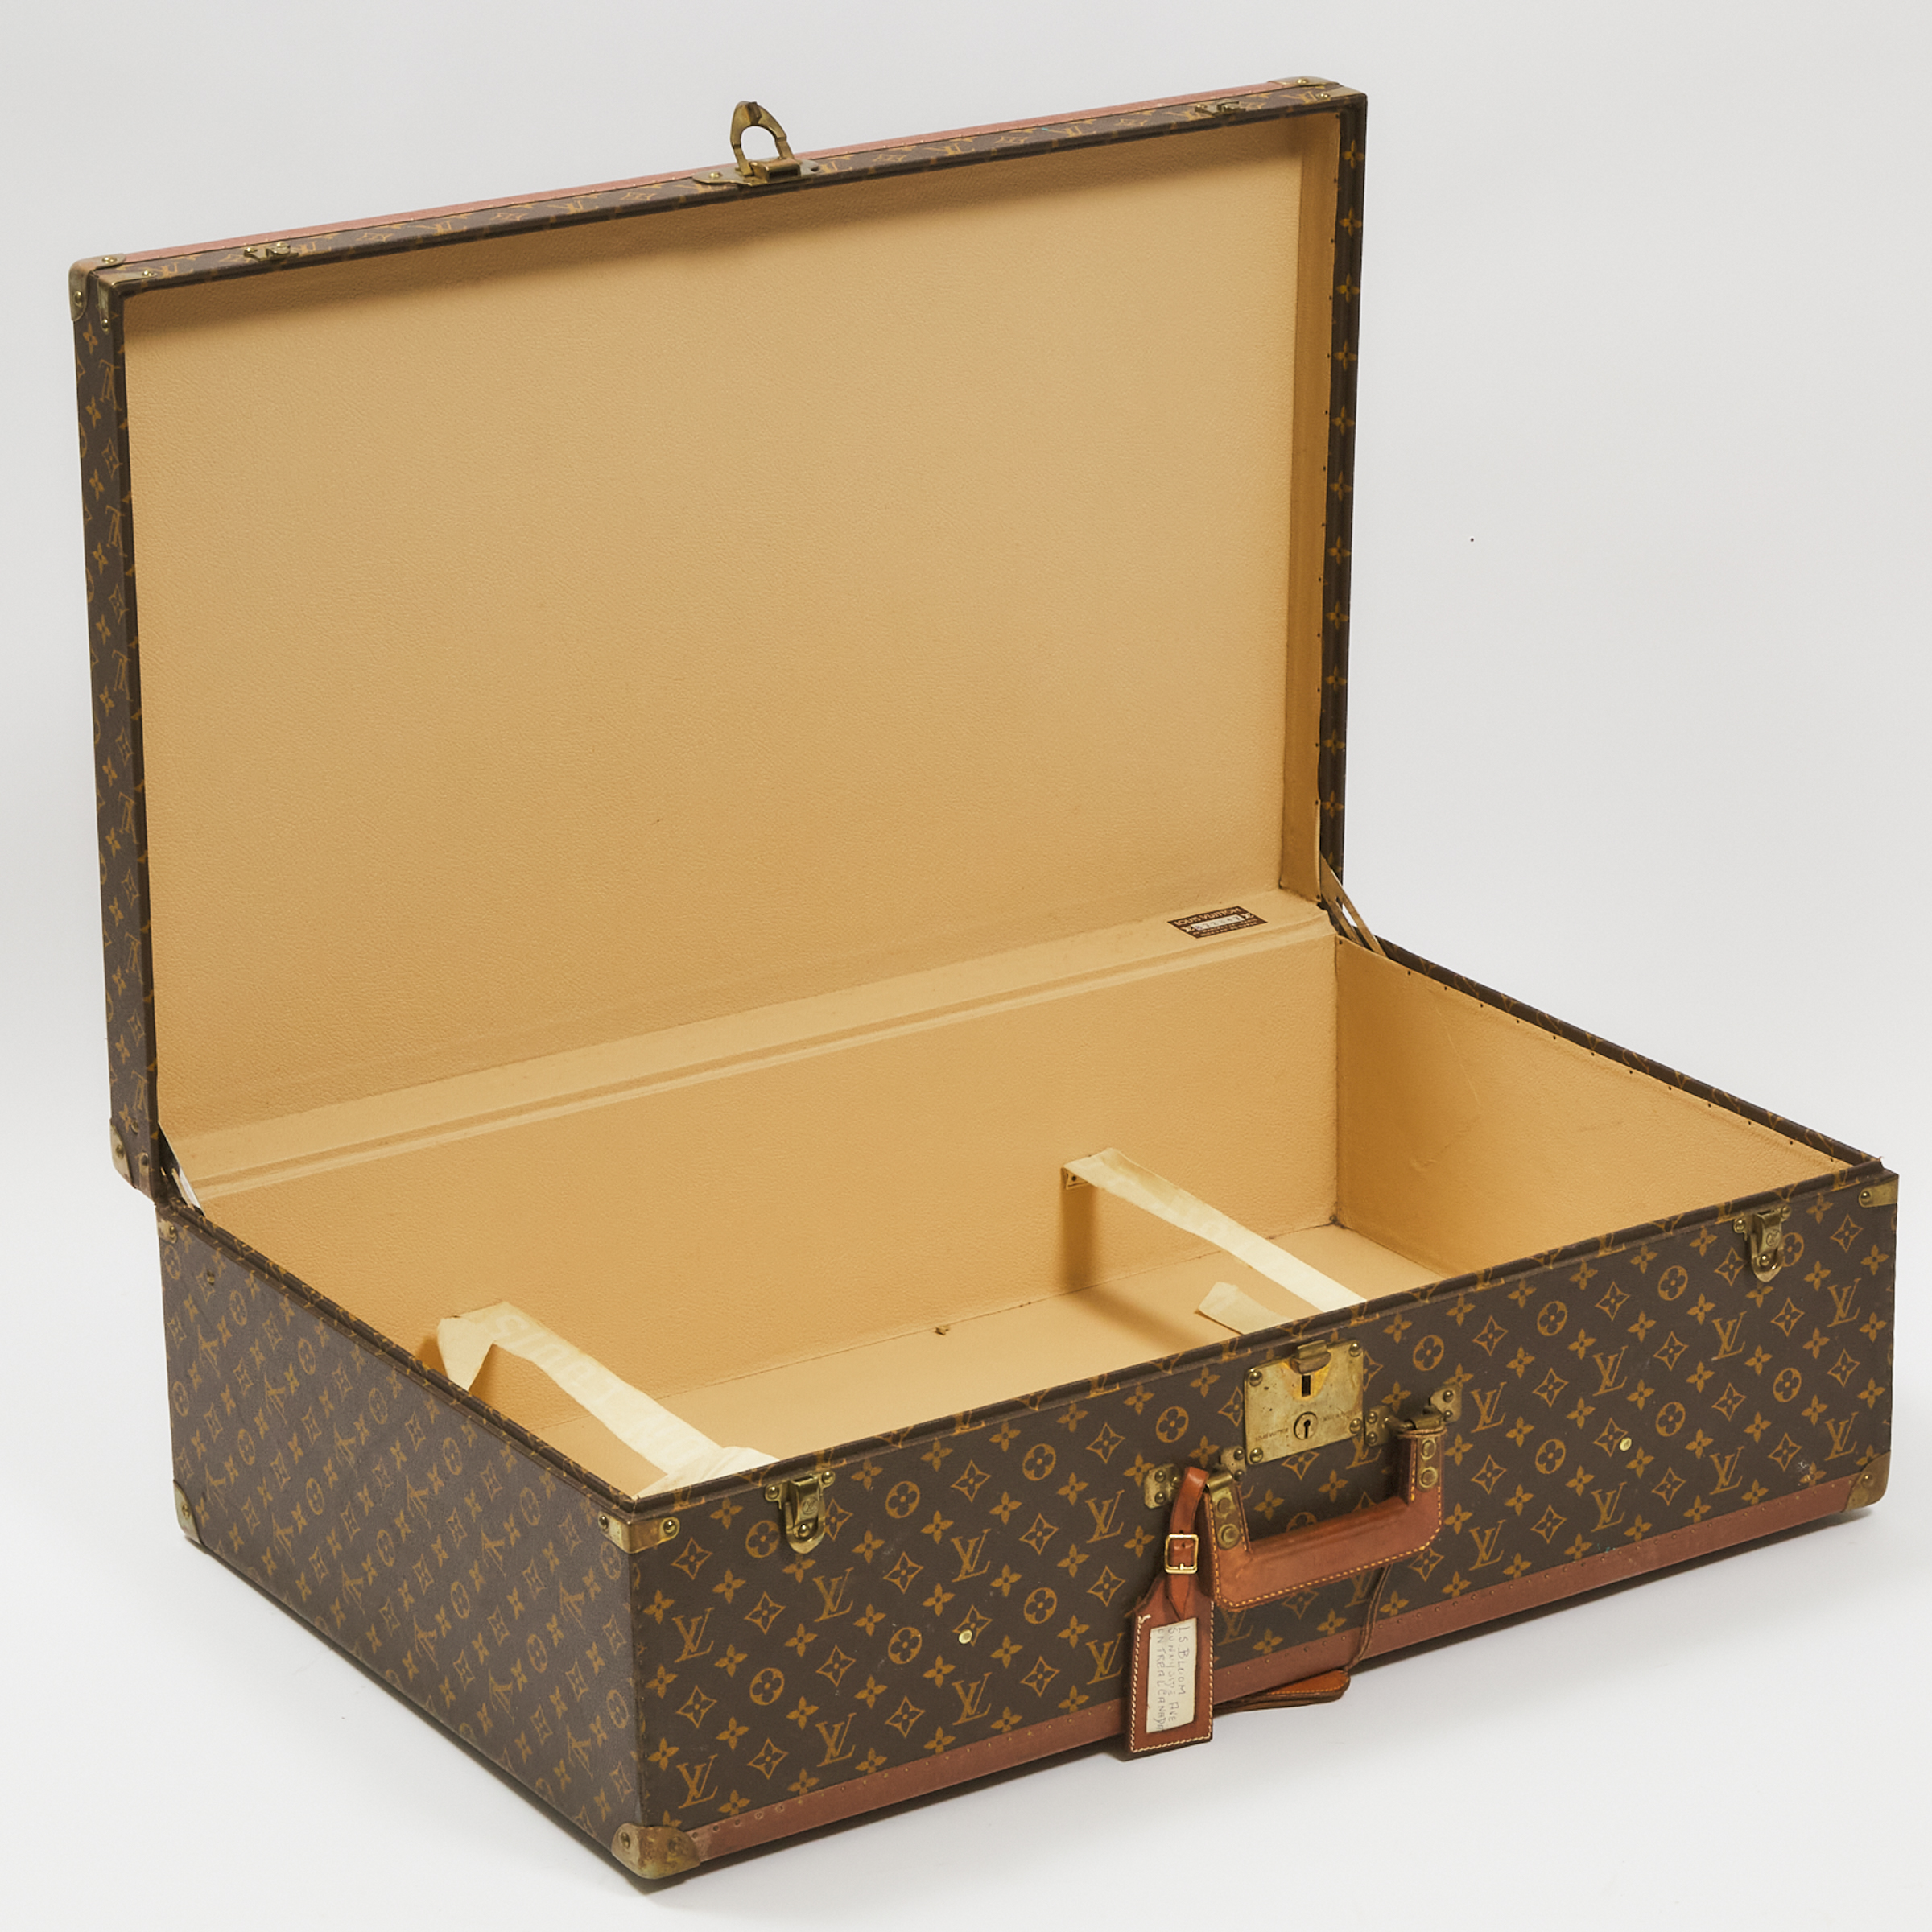 Large Louis Vuitton Monogram Canvas Hard Sided Suitcase, mid 20th century